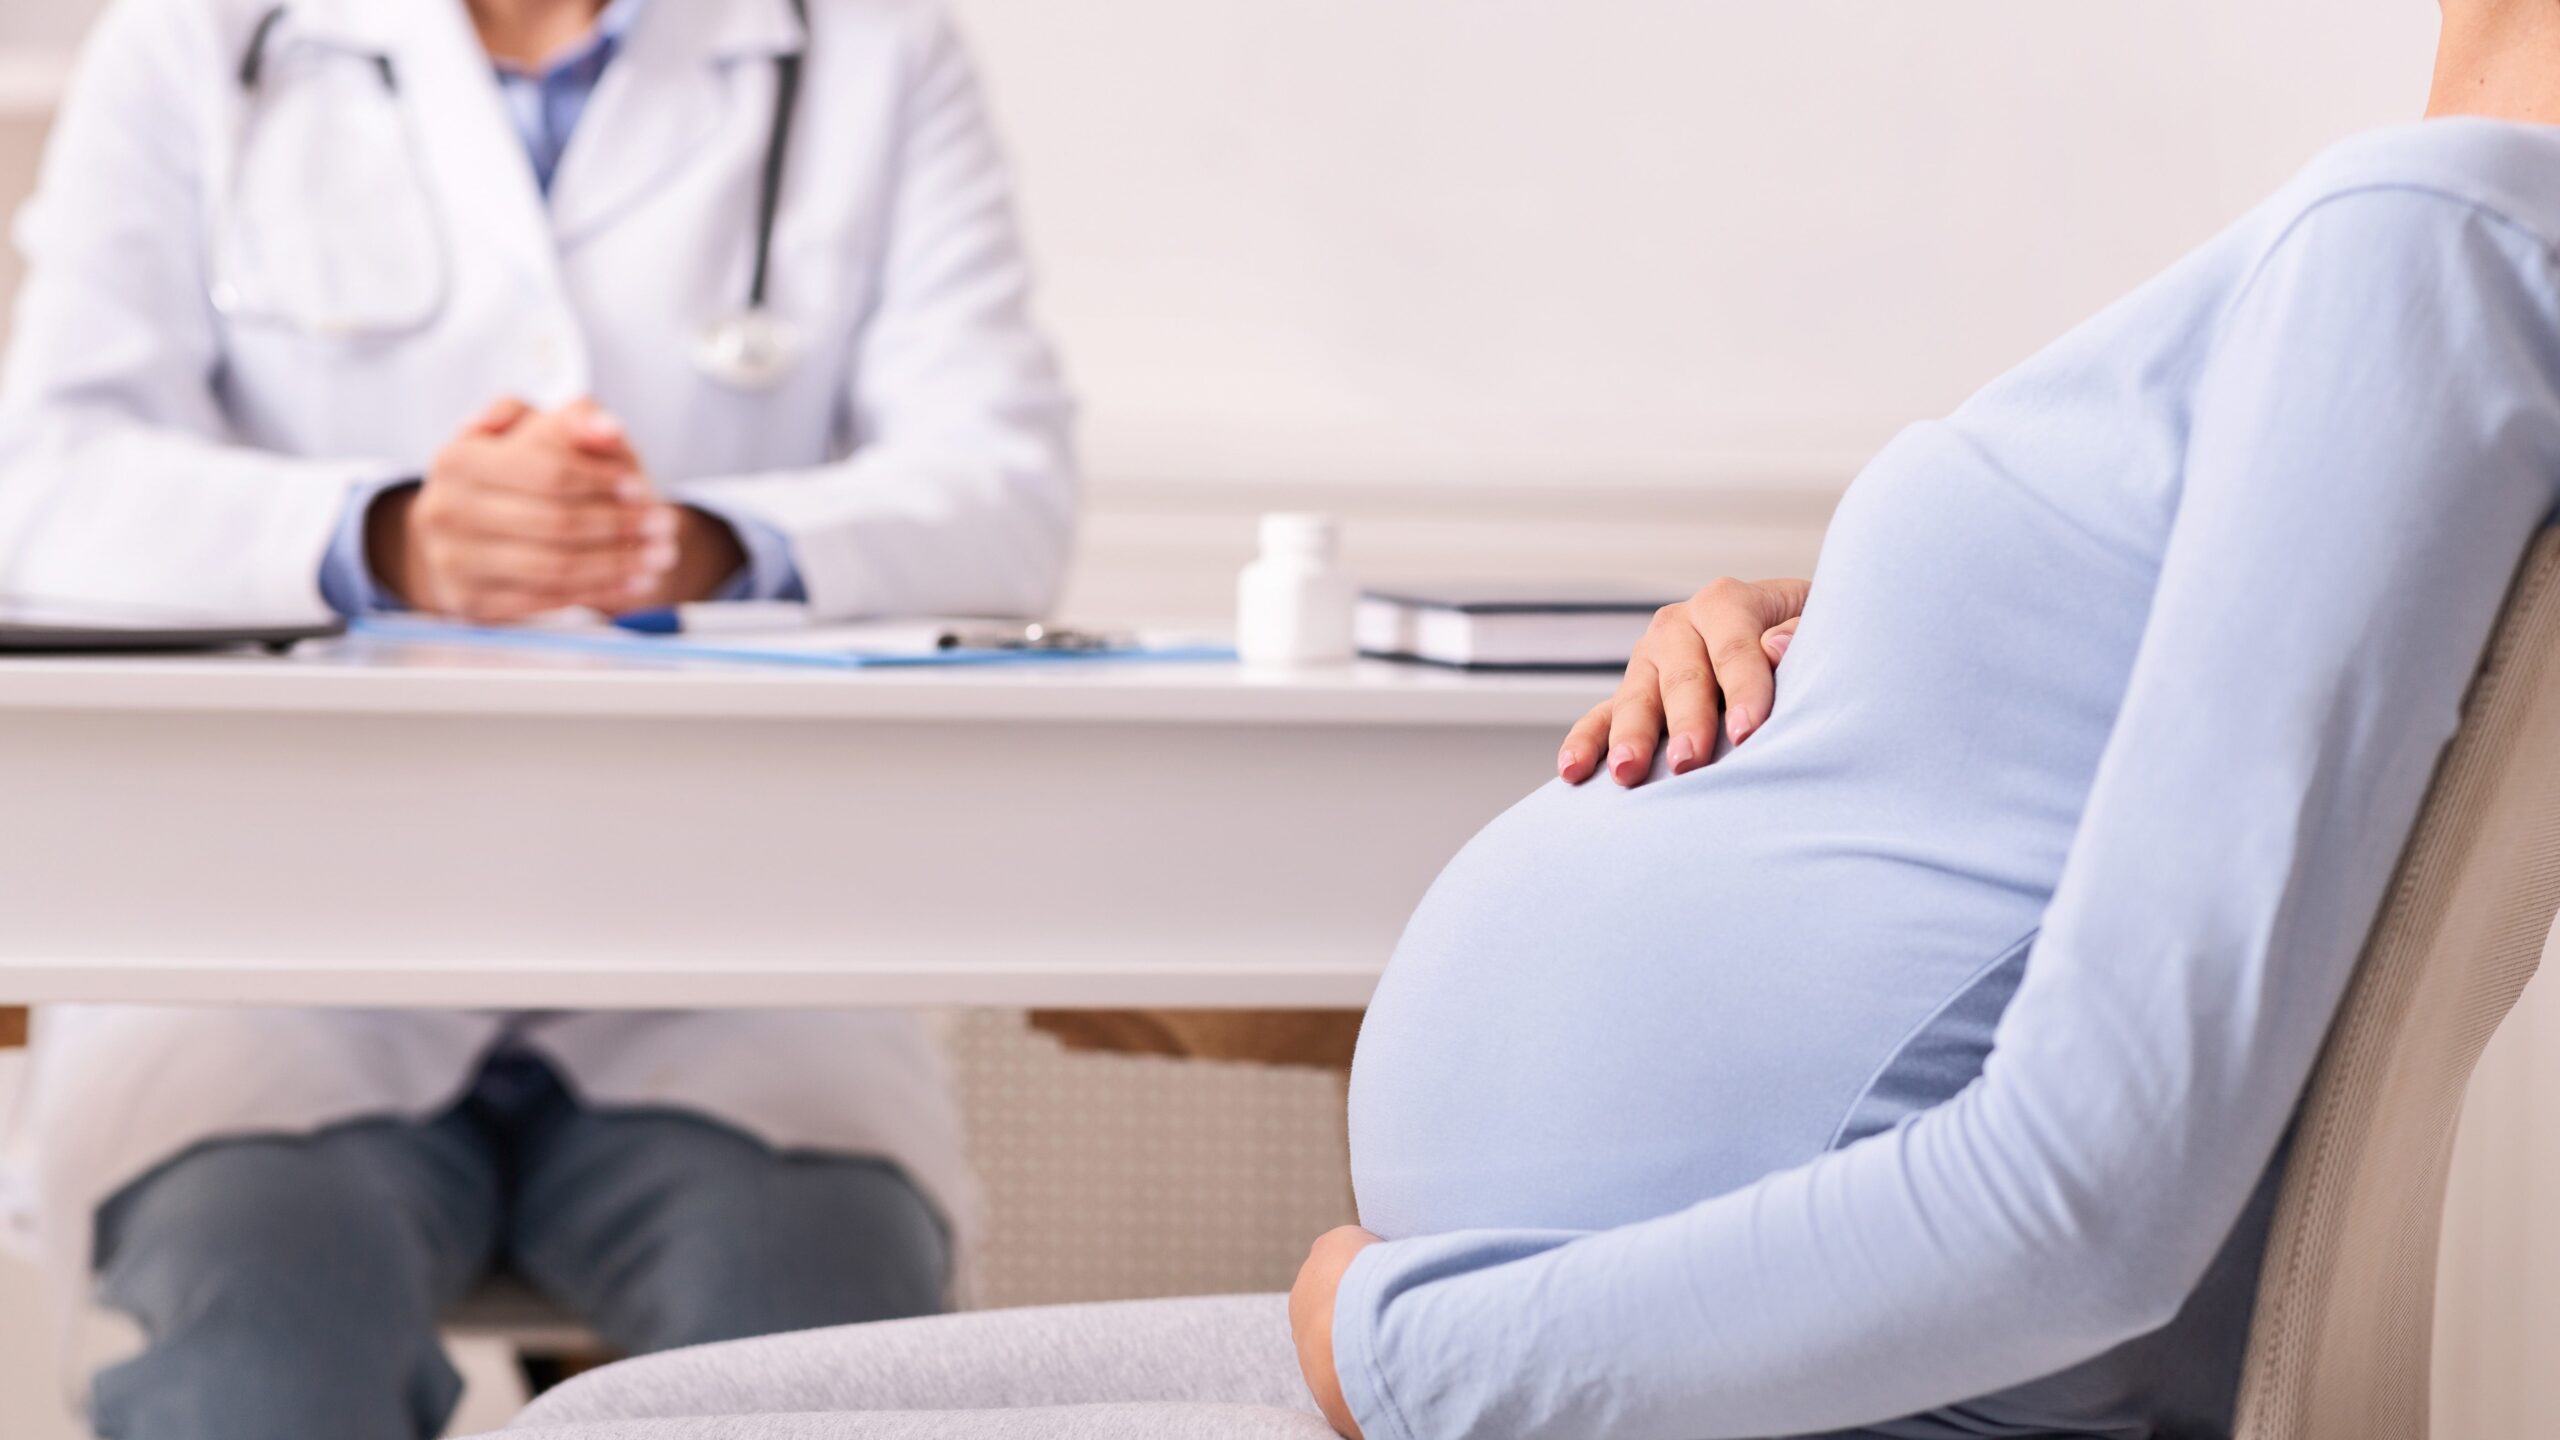 Is Desmopressin Safe In Women with Inherited Bleeding Disorders During Pregnancy?